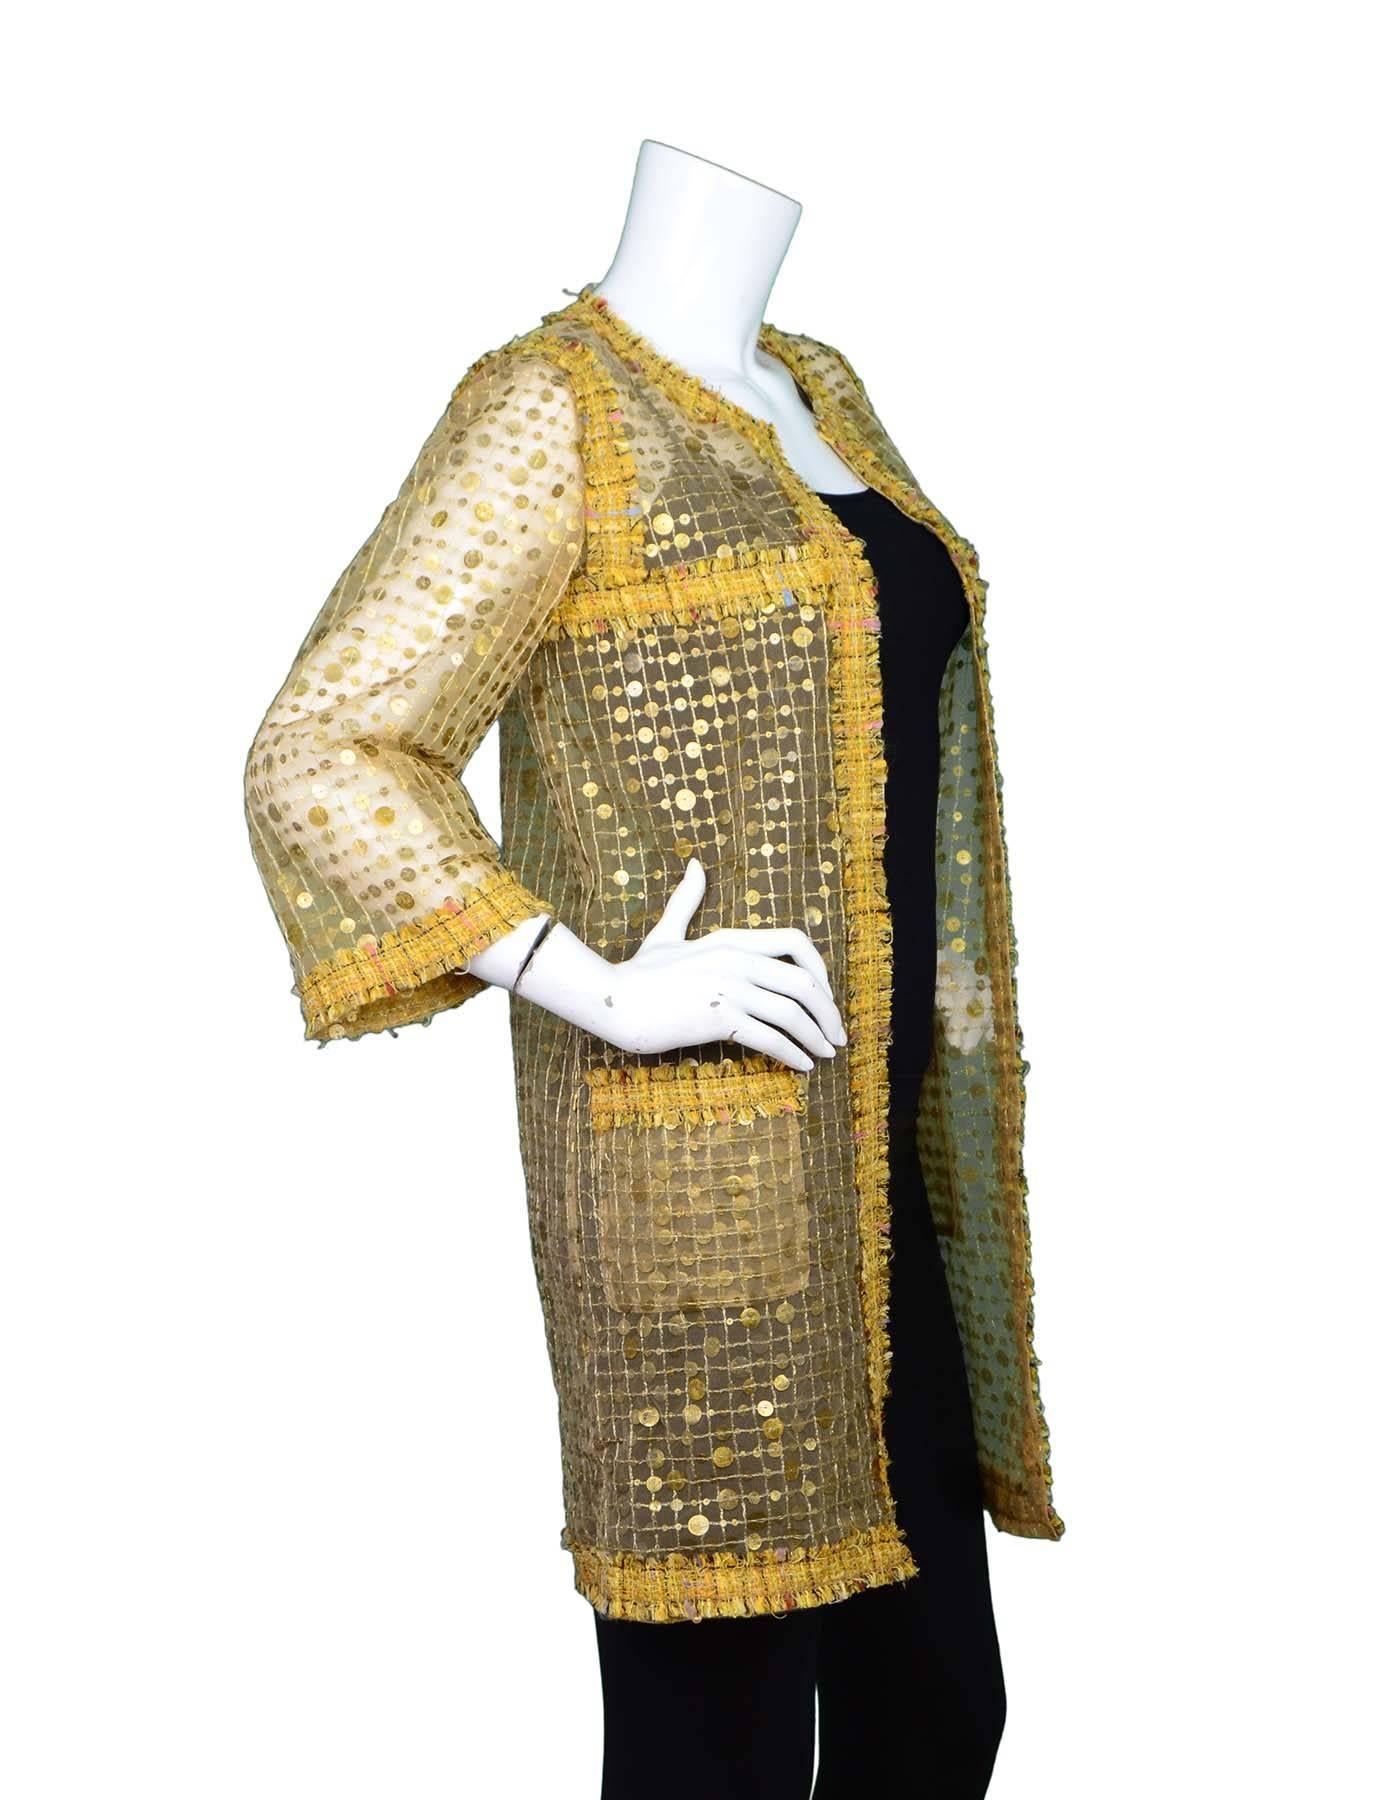 Chanel Sheer Gold Sequin and Tweed Jacket
Features antique gold sequin and metallic threading throughout

Color: Gold
Composition: Not listed
Lining: None - sheer
Closure/Opening: Single hidden front hook and eye closure
Exterior Pockets: Two